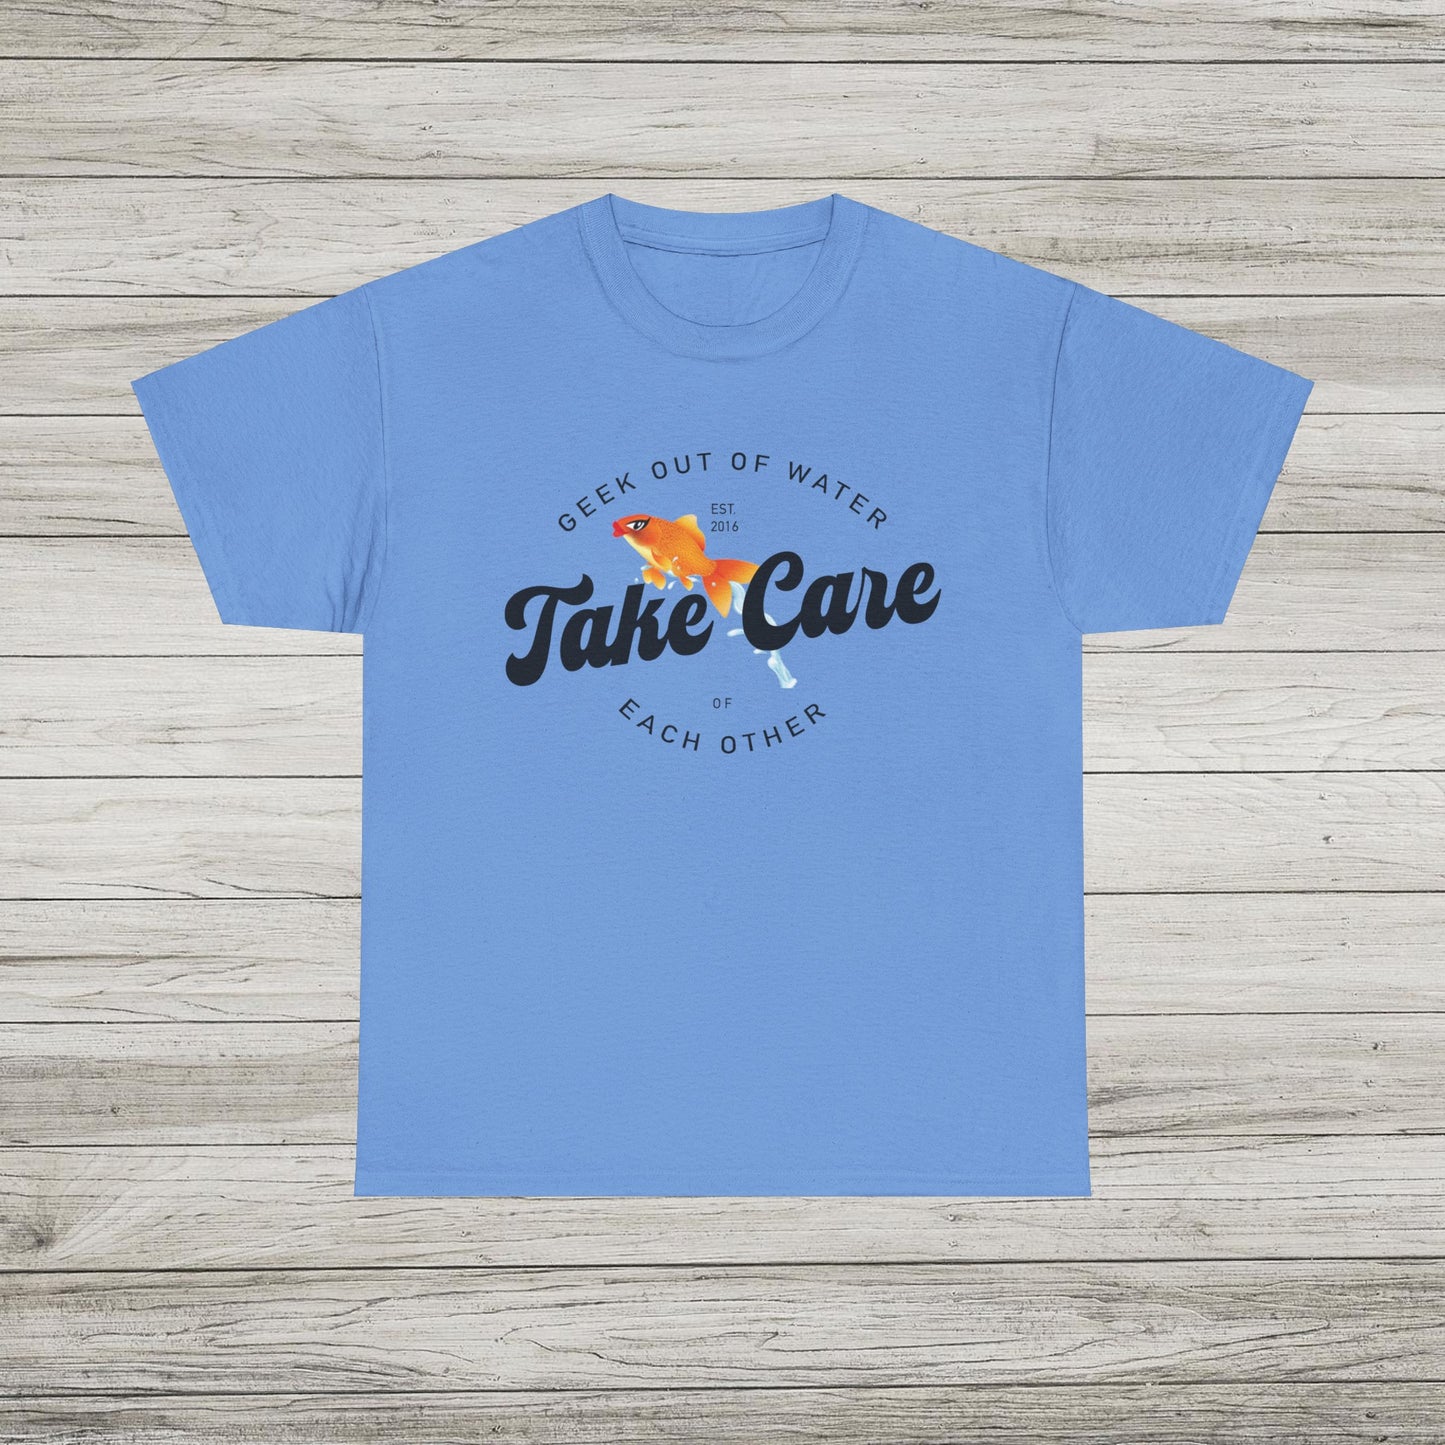 Take Care of Each Other T-Shirt, Geek Out of Water TShirt, Happy Goldfish Tee